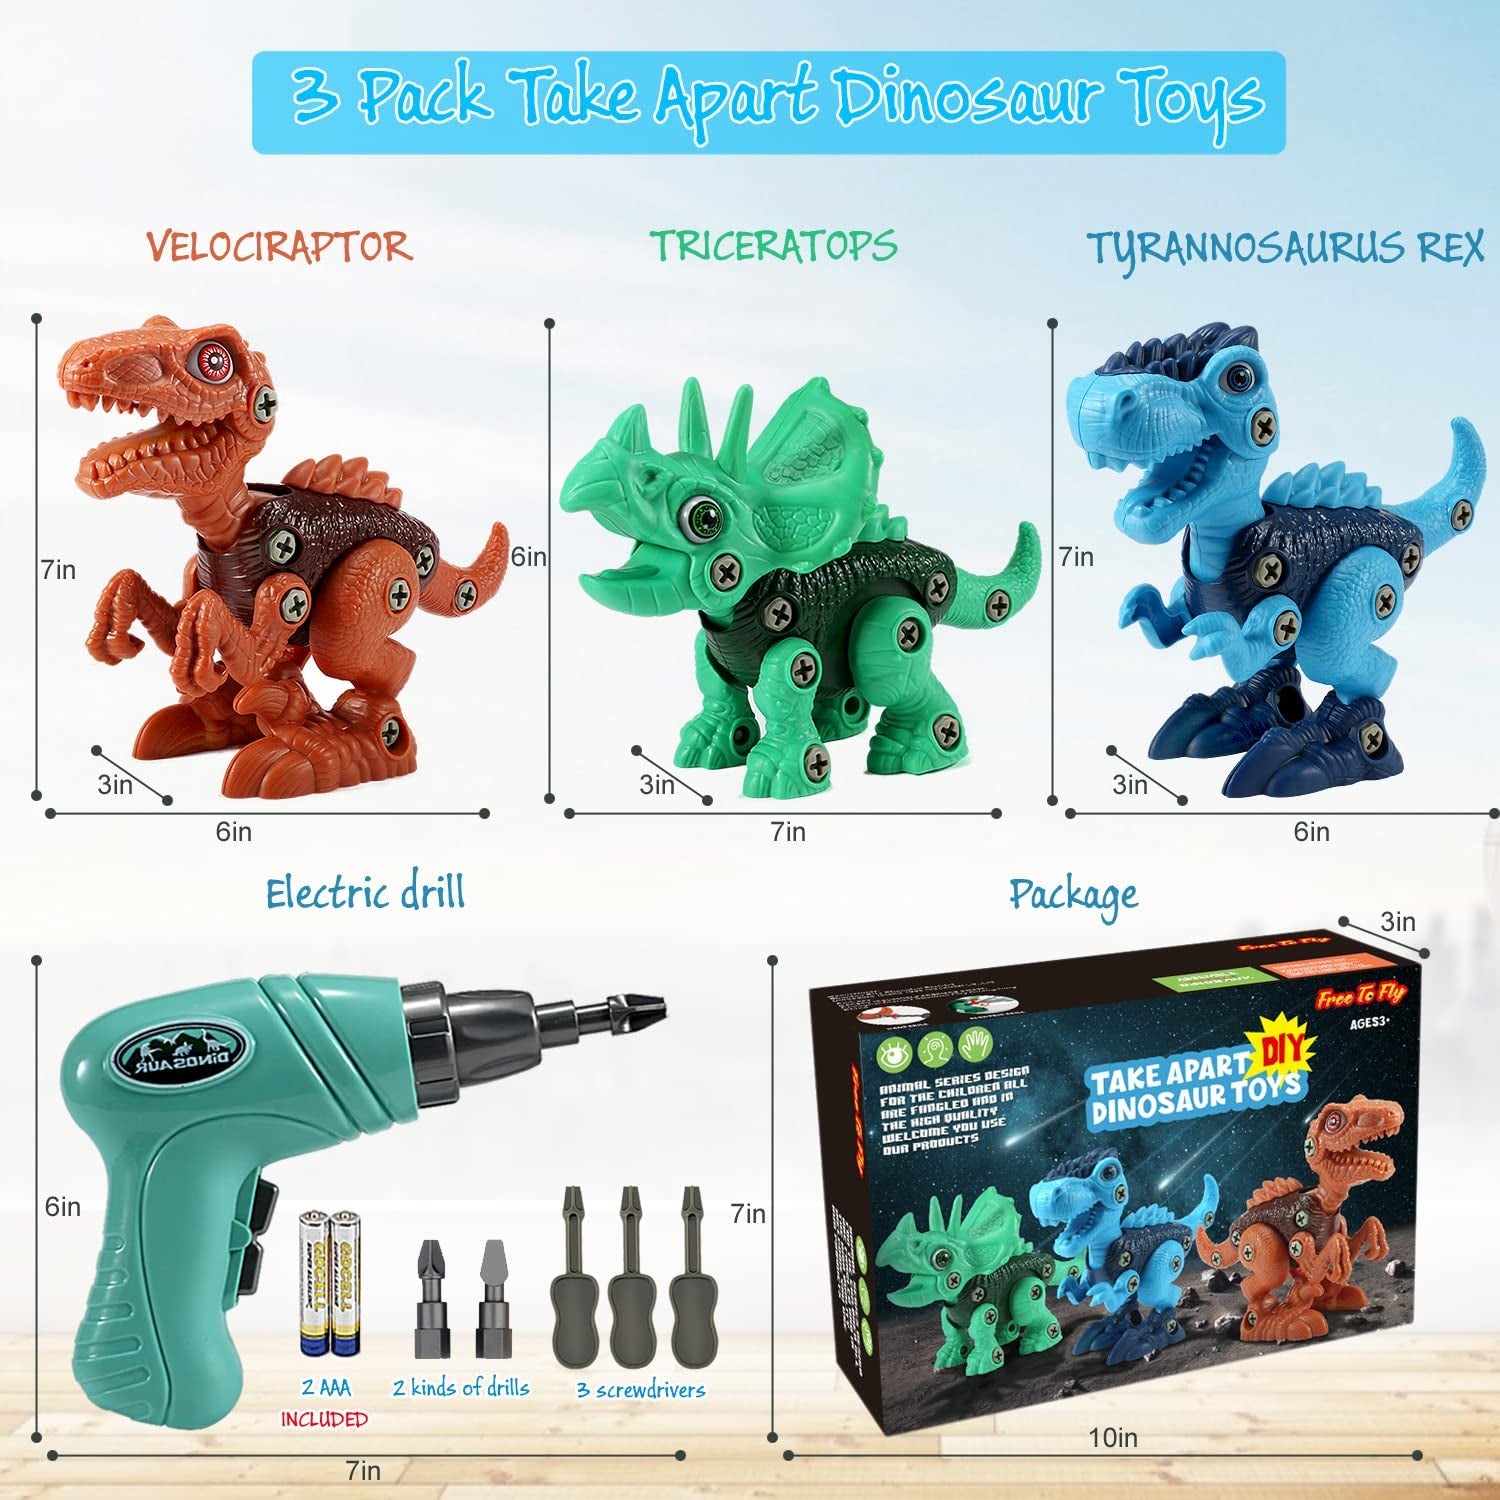 STEM Dinosaur Toy: Educational Take Apart Toy for Kids - Learning Building Construction Set with Electric Drill - Ideal Birthday Gift for Toddlers, Boys, and Girls aged 3-8.